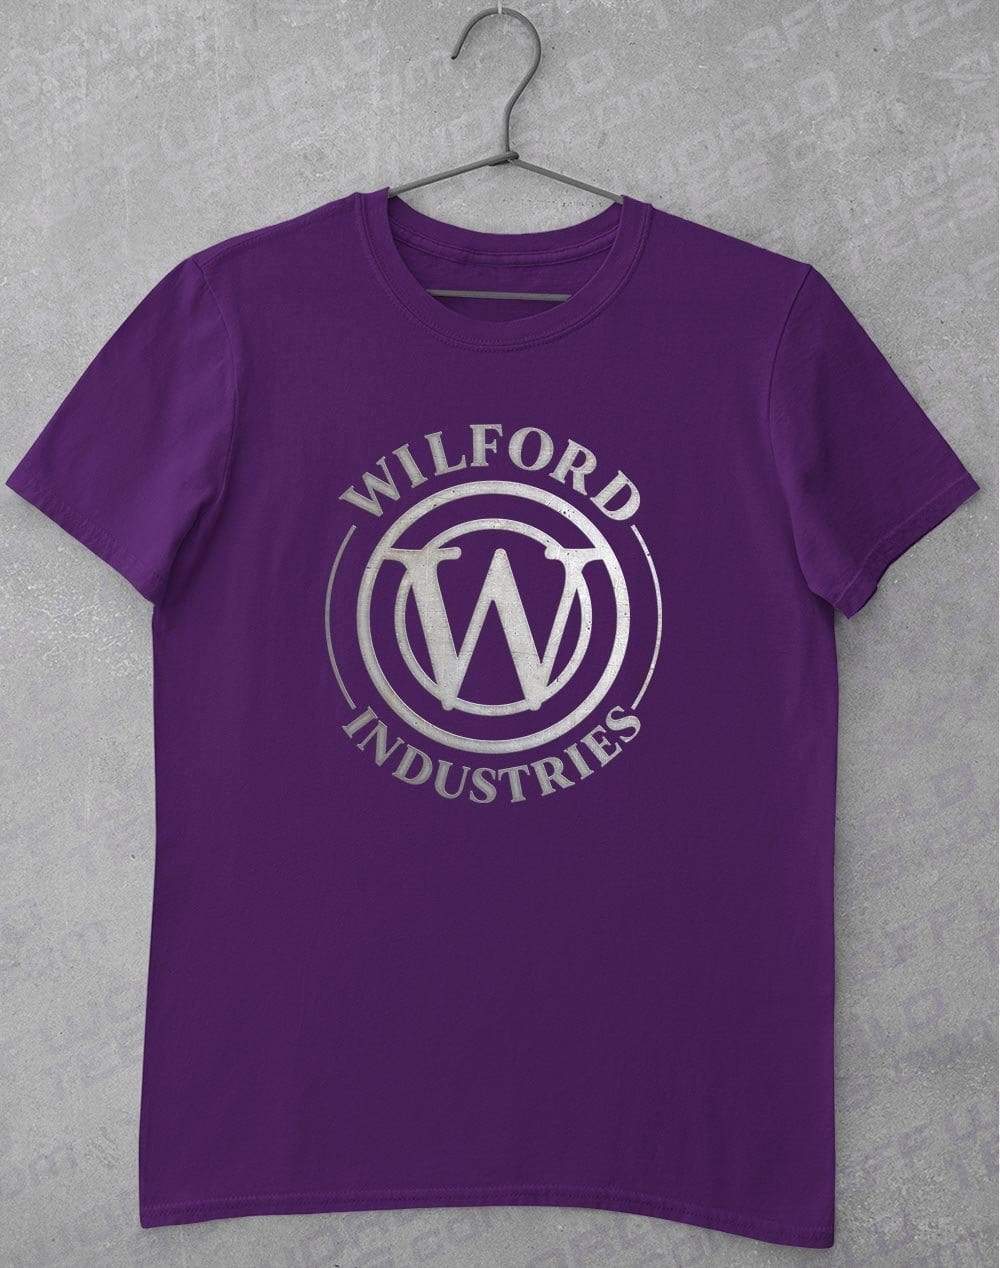 Wilford Industries T-Shirt S / Purple  - Off World Tees